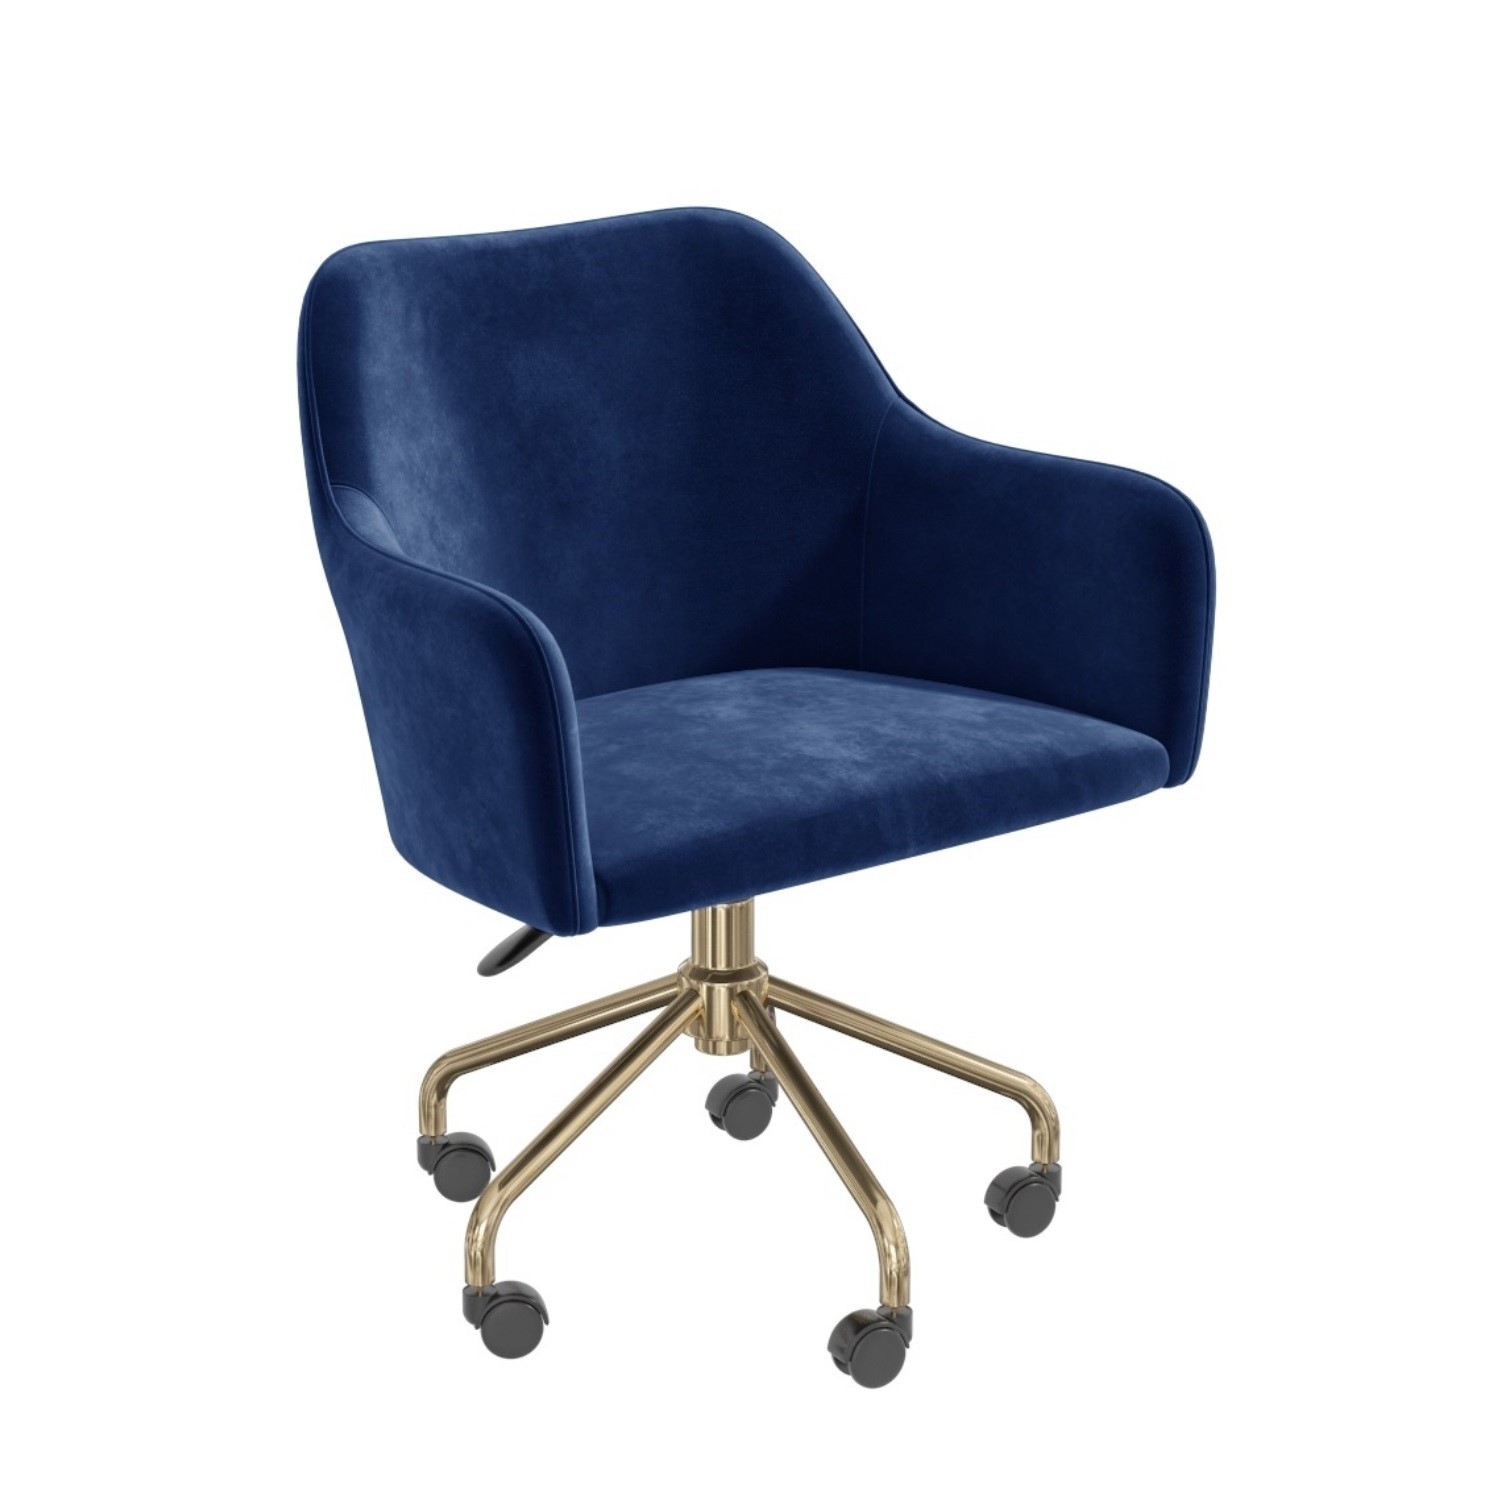 Navy Blue Velvet Office Swivel Chair With Gold Base Marley Furniture123